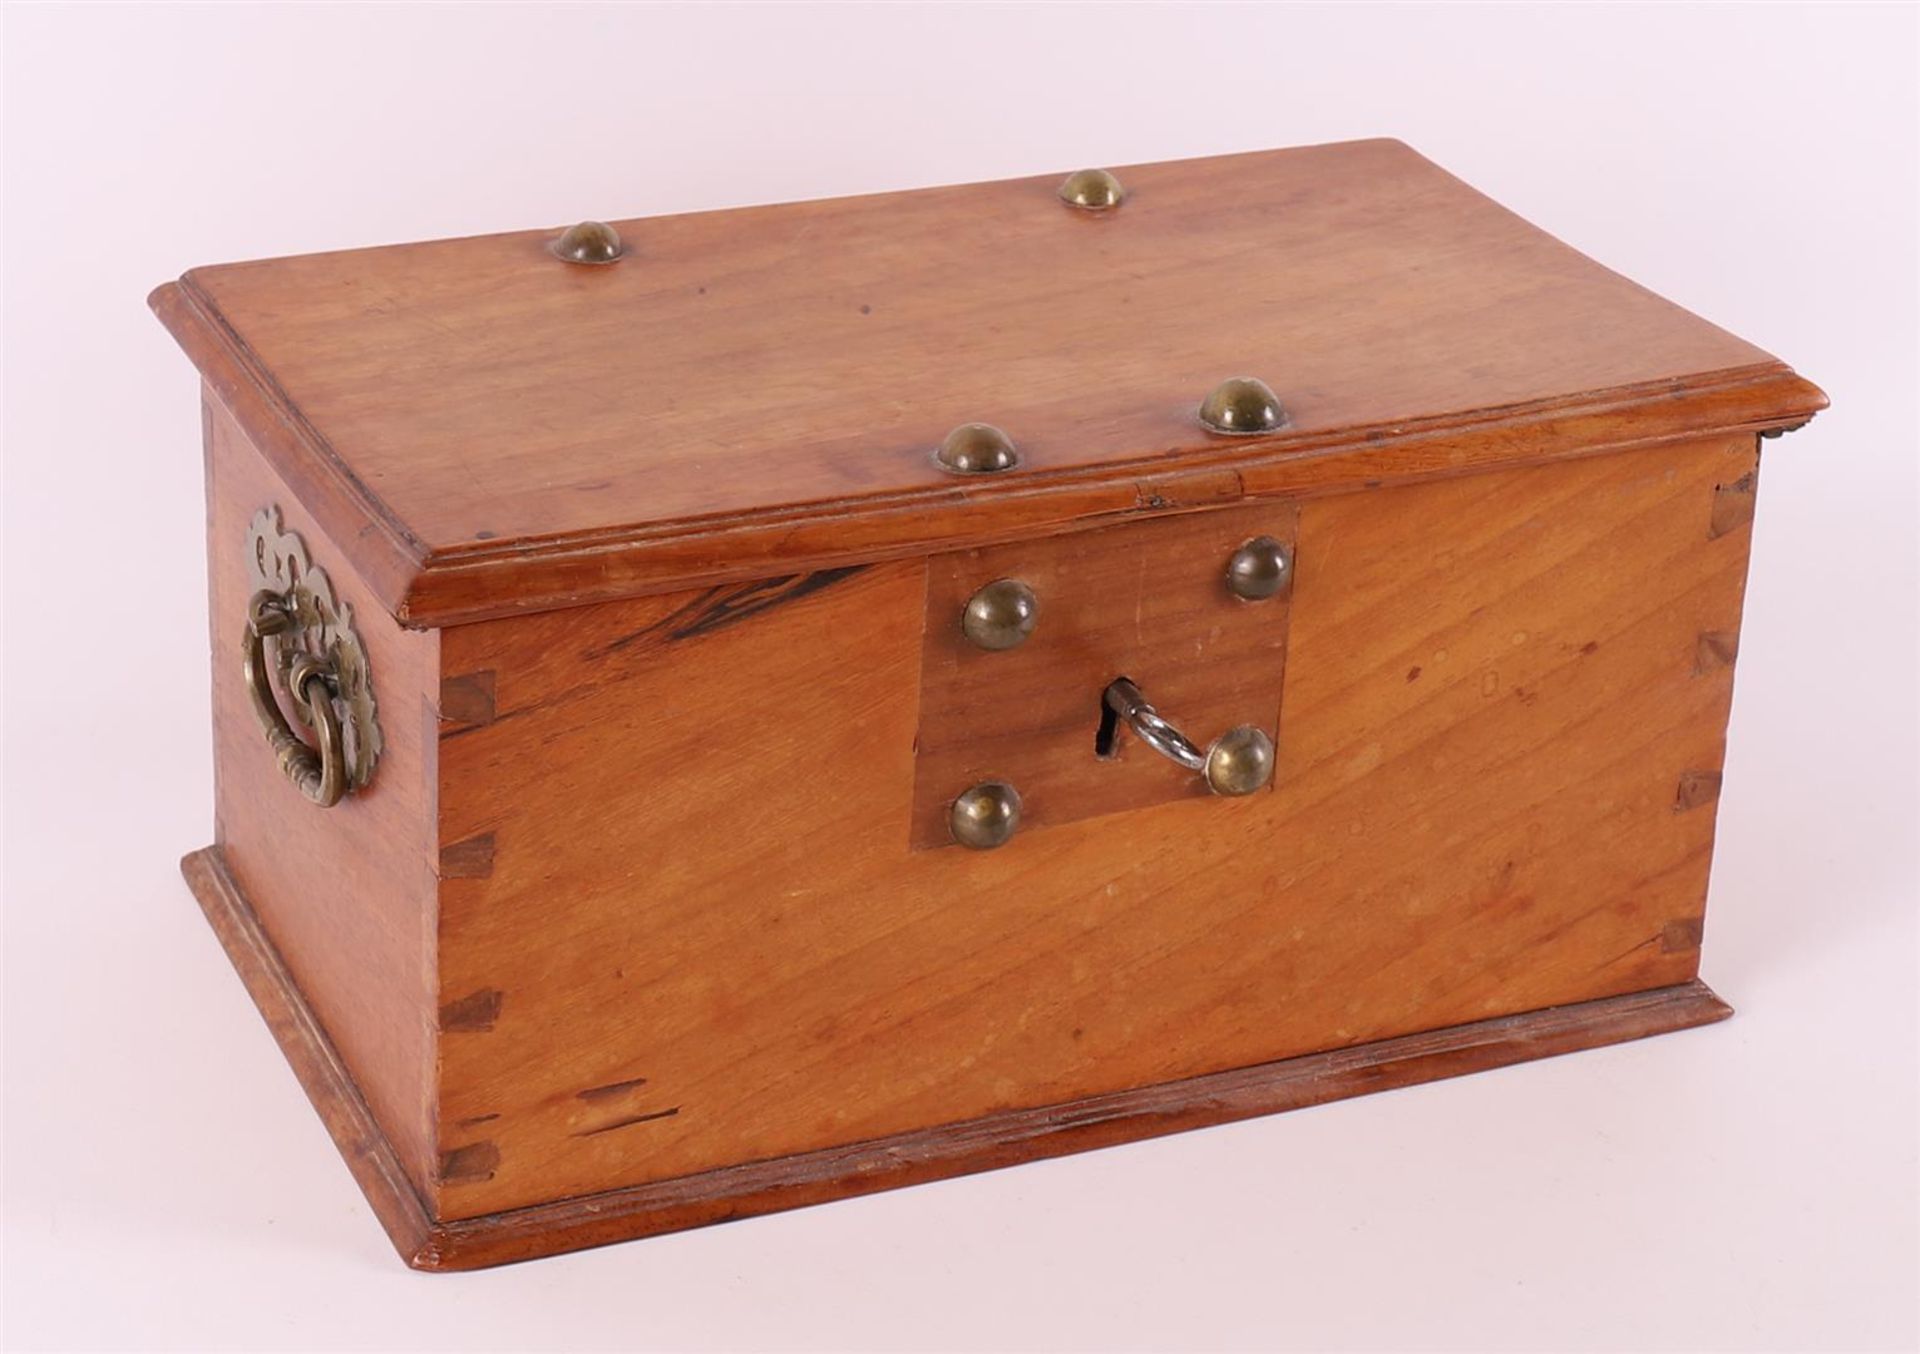 A teak miniature chest with brass fittings, 19th century.